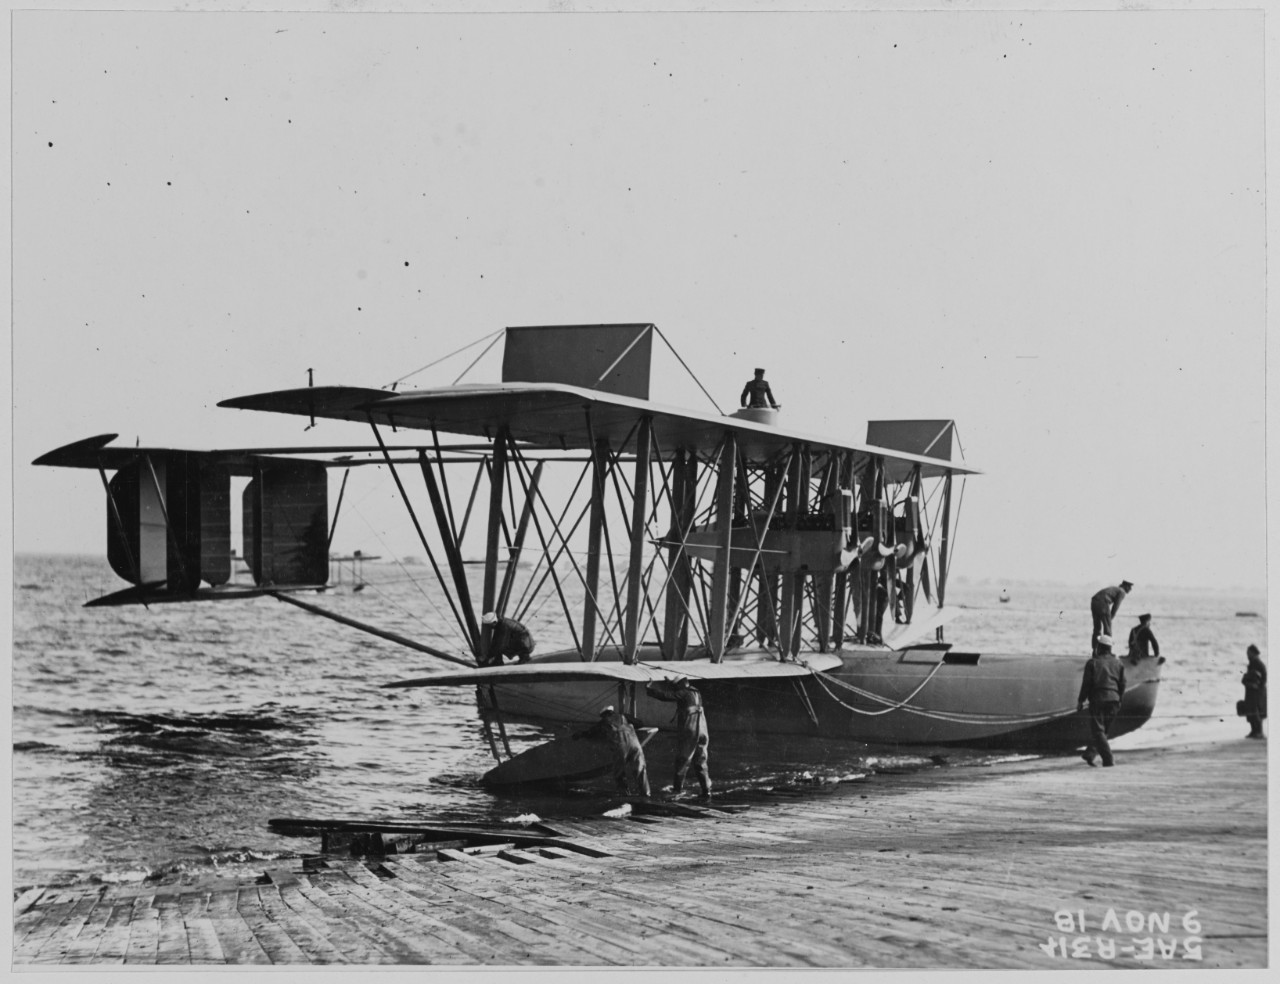 NC-1 side view